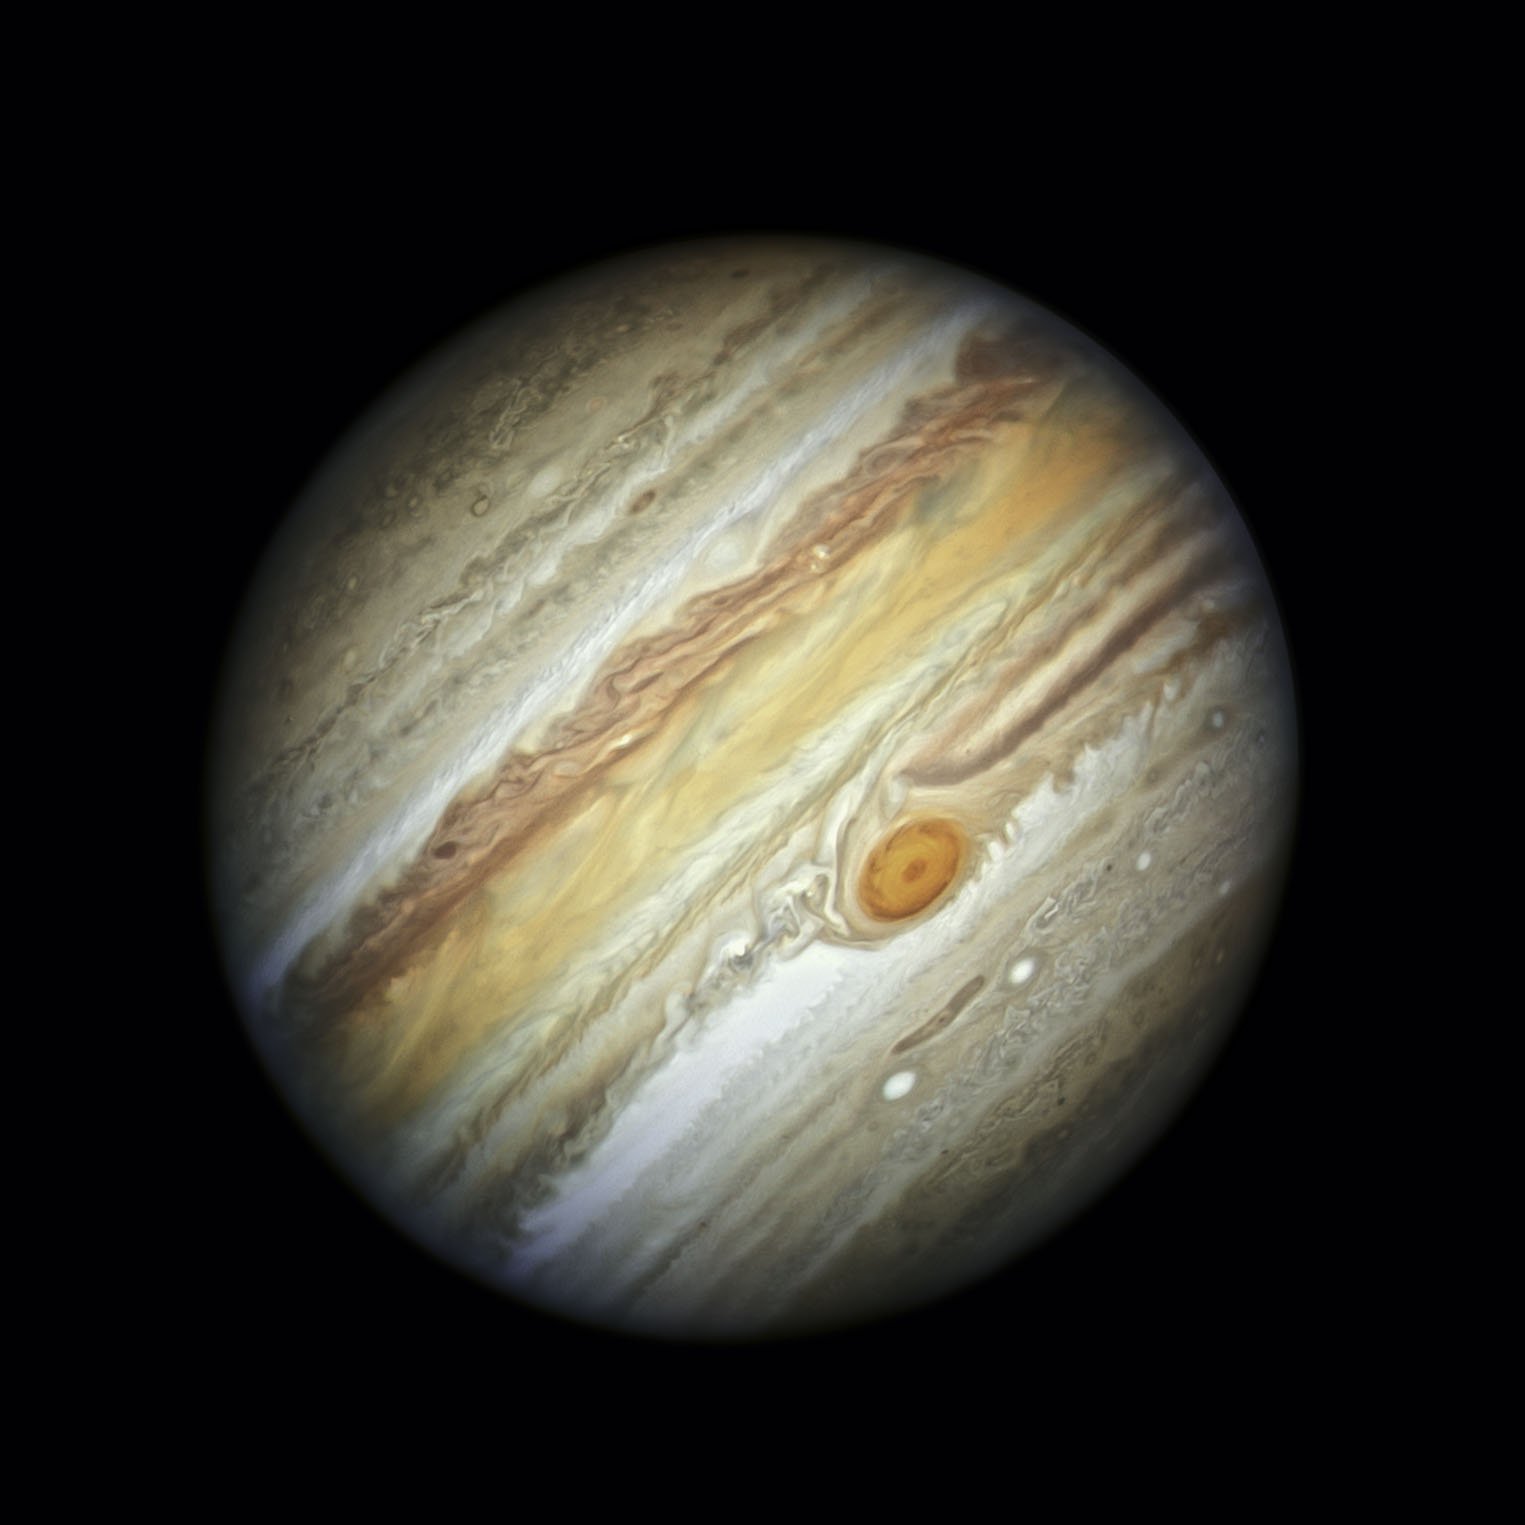 A detailed look at Jupiter from NASA's Hubble Space Telescope. Colorful cloud bands and the Great Red Spot are visible.